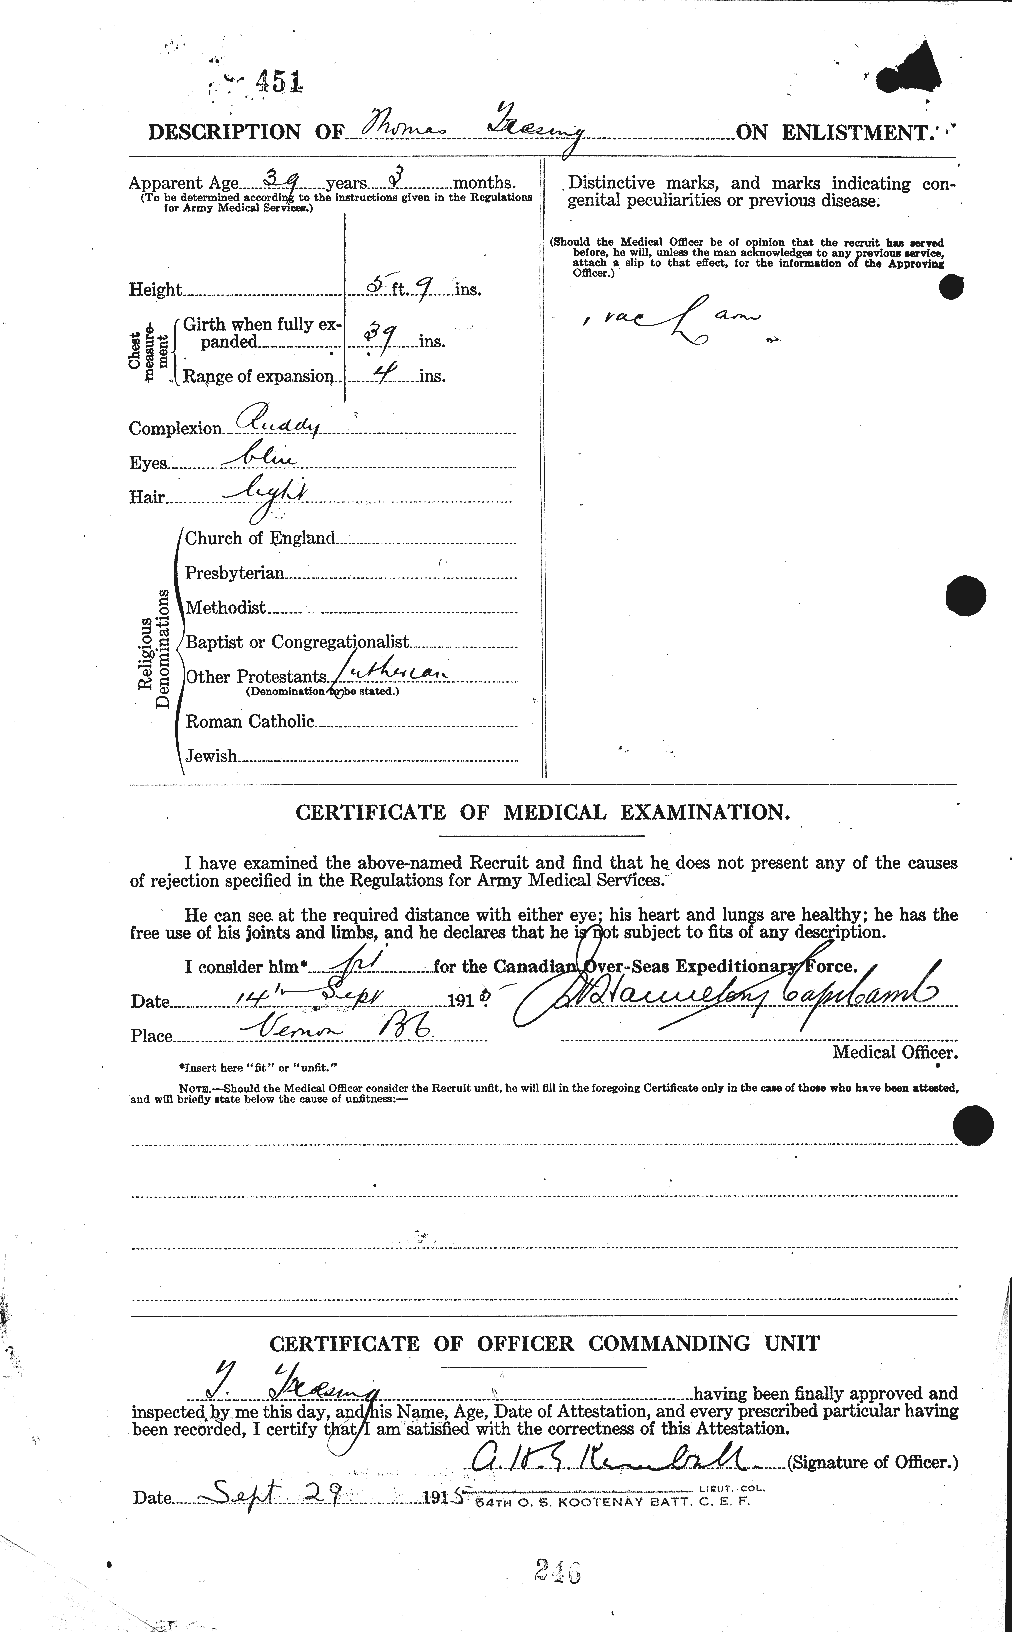 Personnel Records of the First World War - CEF 638573b